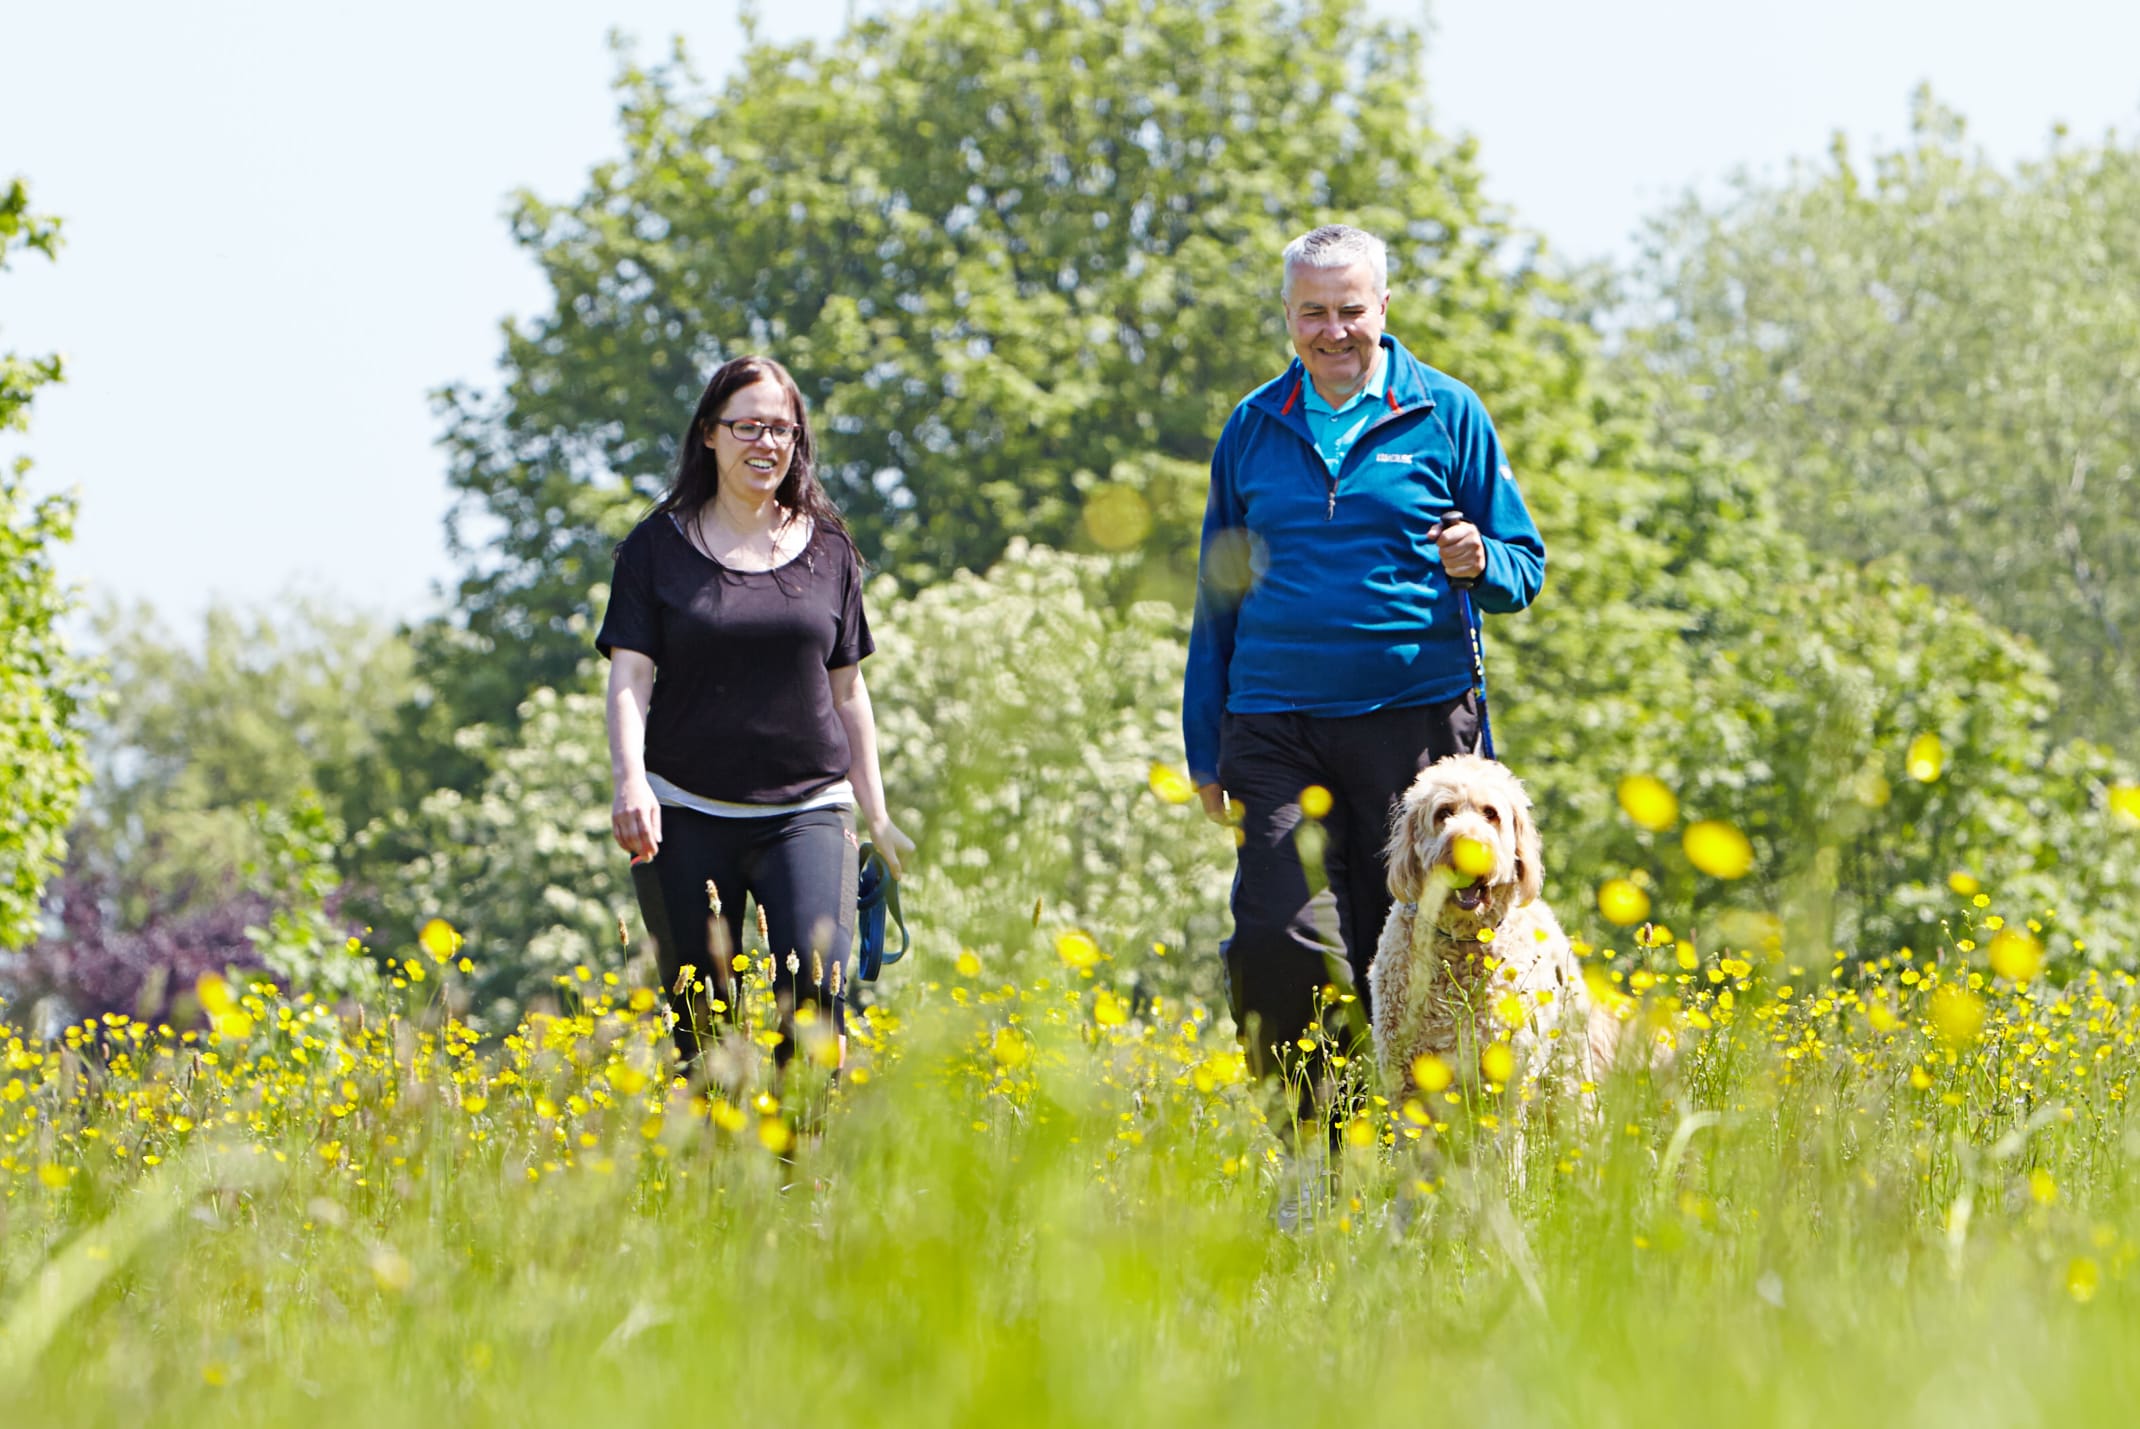 A man and a woman walk together with a golden retriever dog through a grassy meadow.